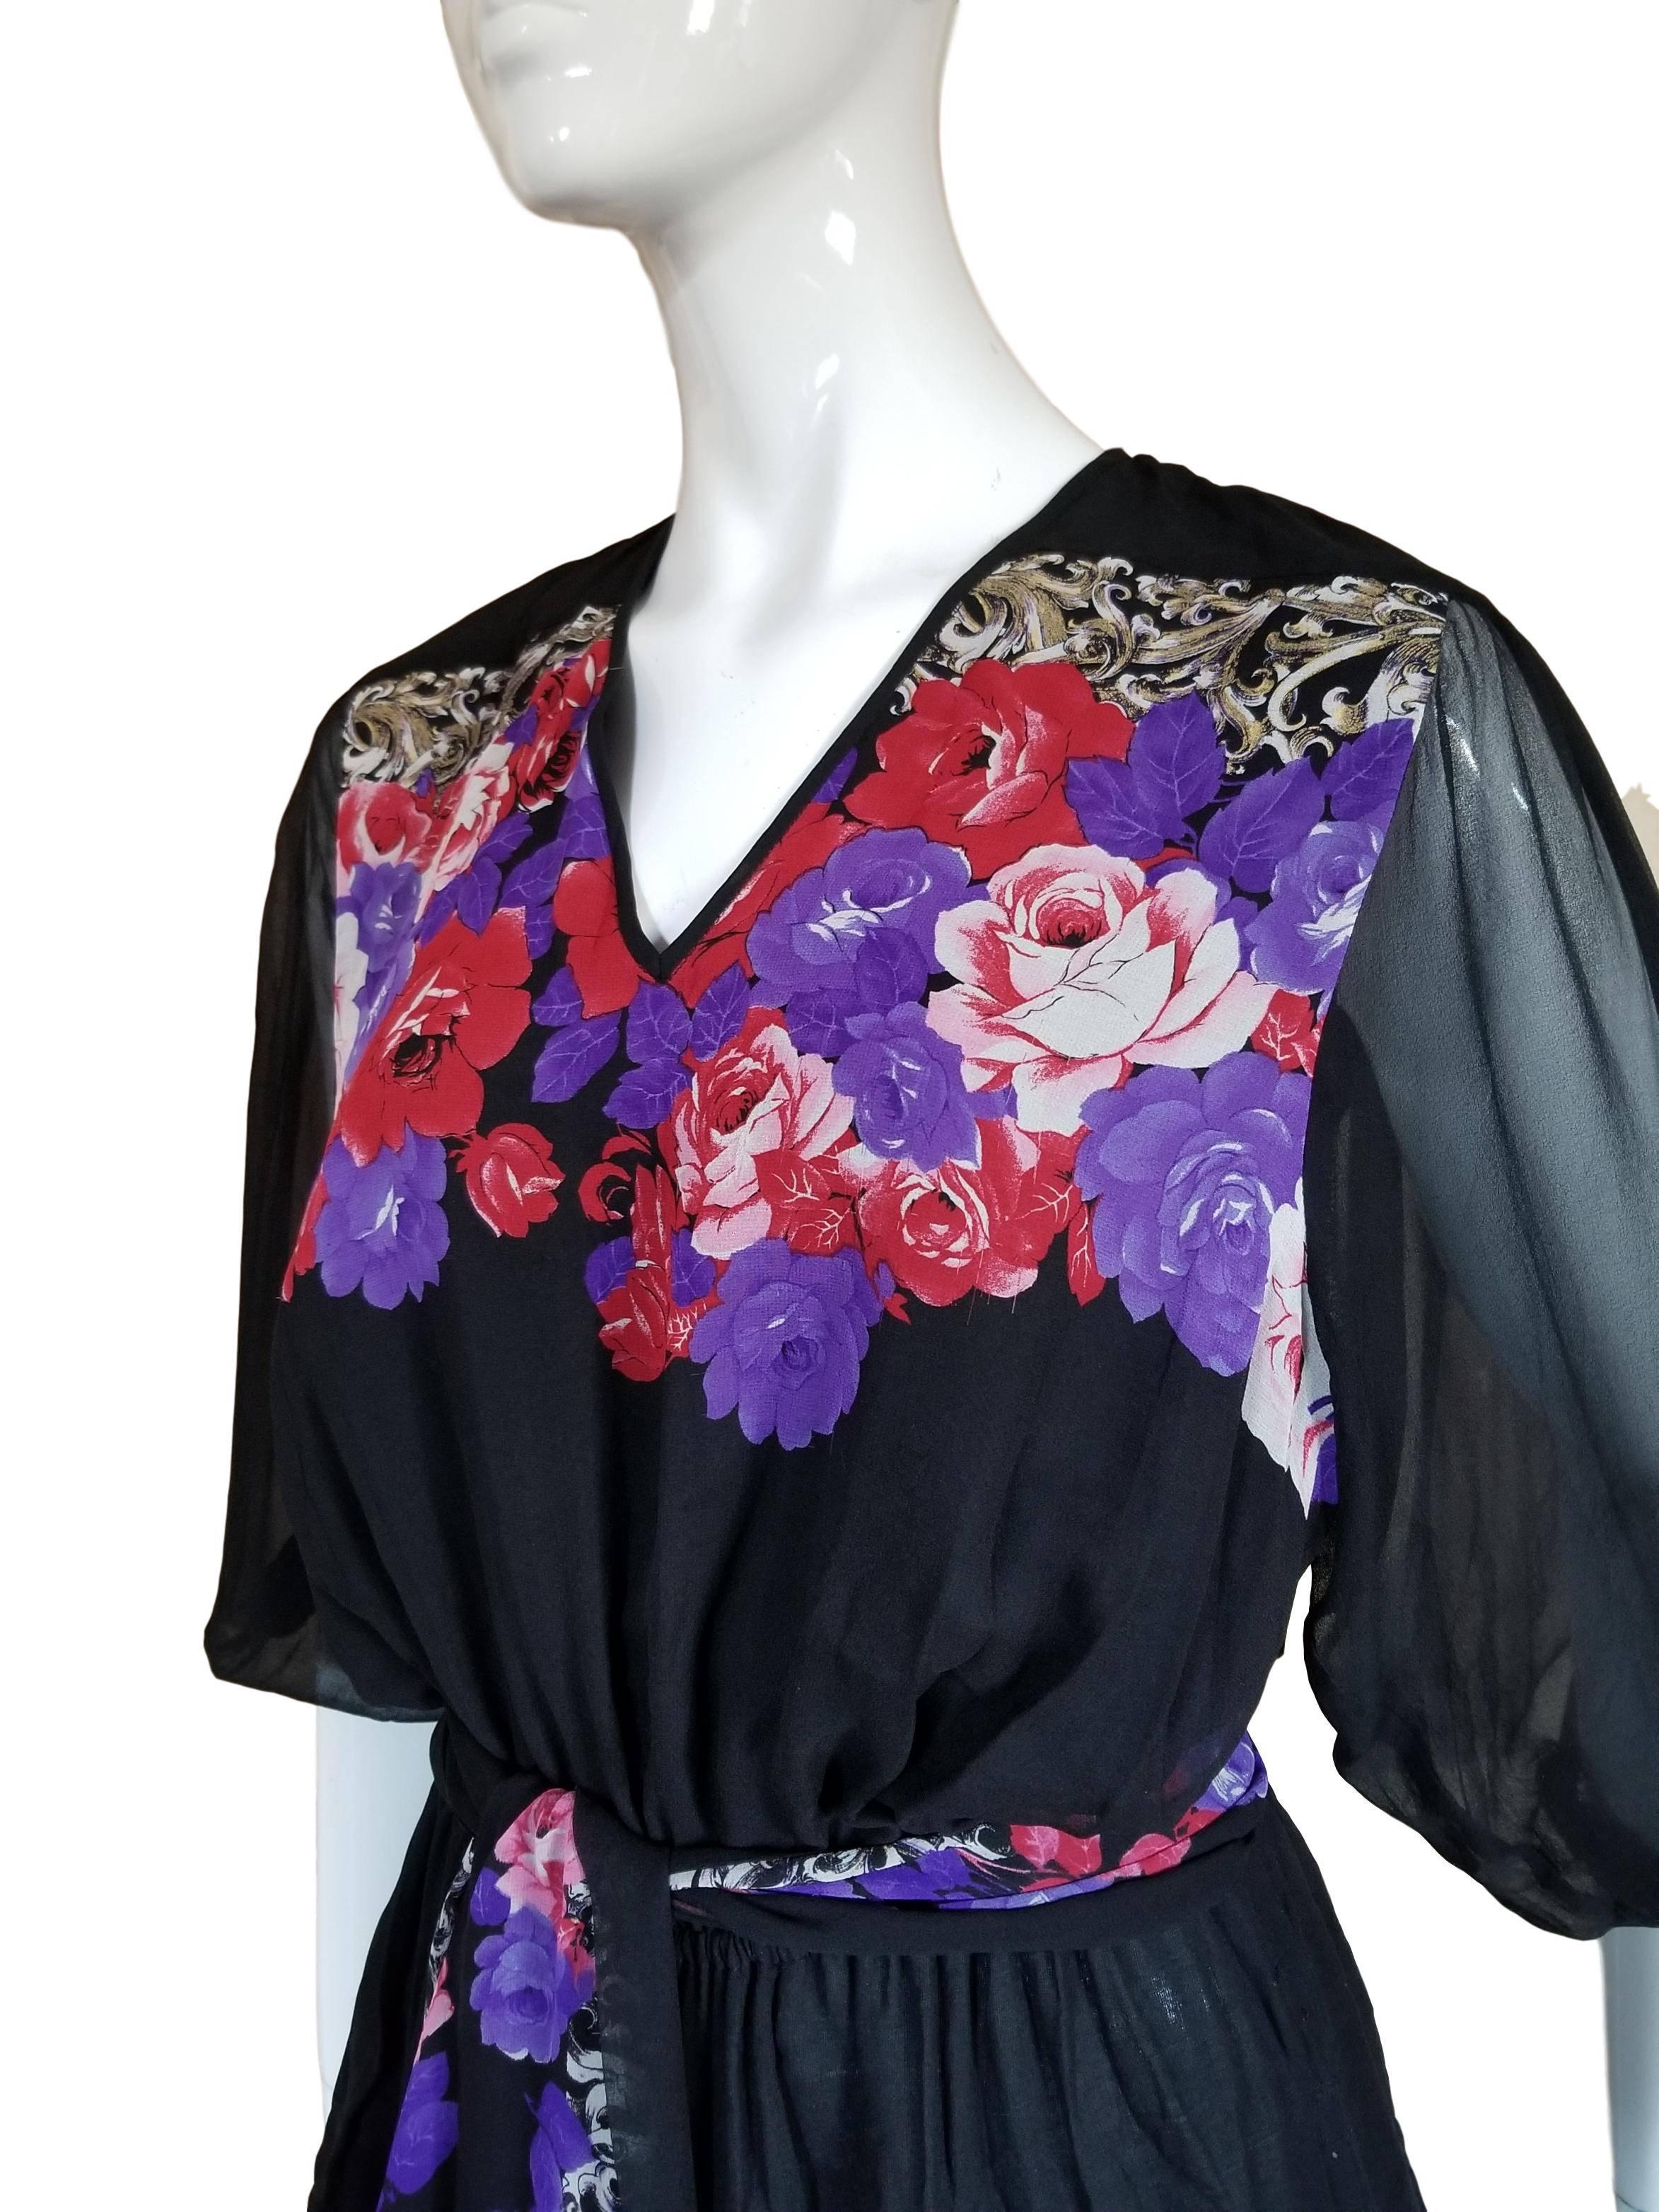 Diane Freis Vintage Silk Black Graphic Floral Print Chiffon Maxi Dress With Sash In Excellent Condition For Sale In Portsmouth, Hampshire